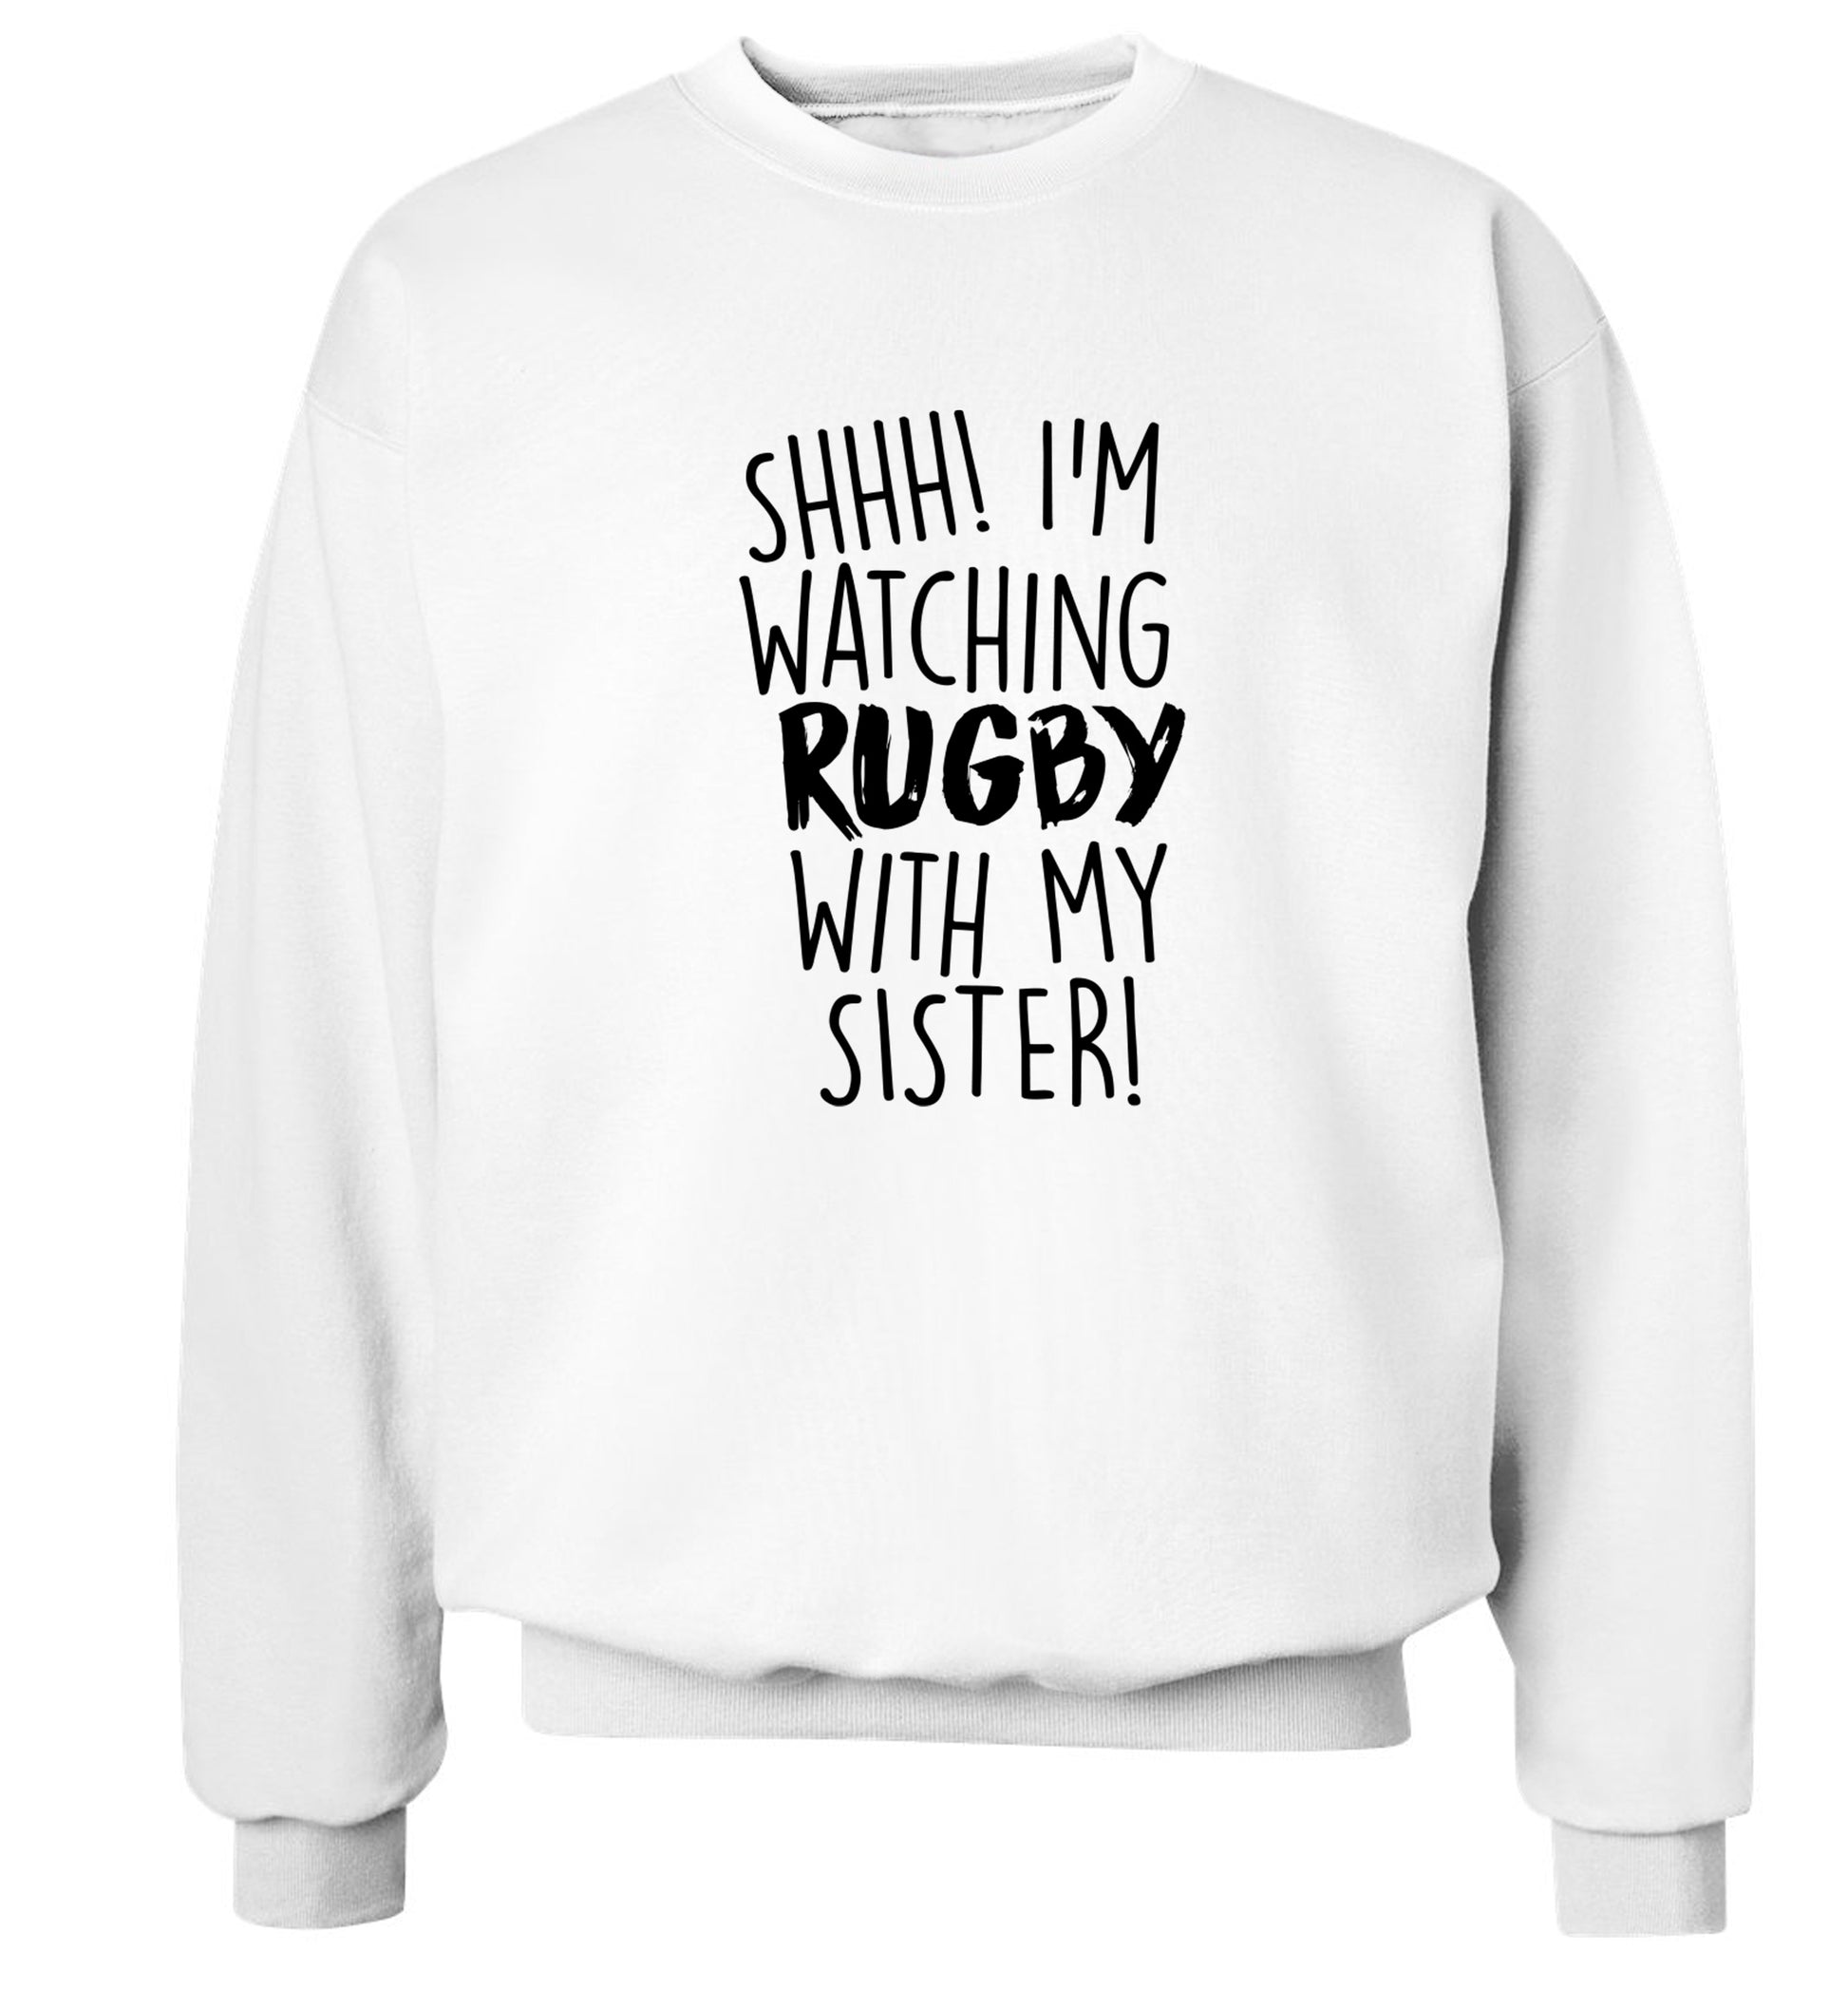 Shh... I'm watching rugby with my sister Adult's unisex white Sweater 2XL